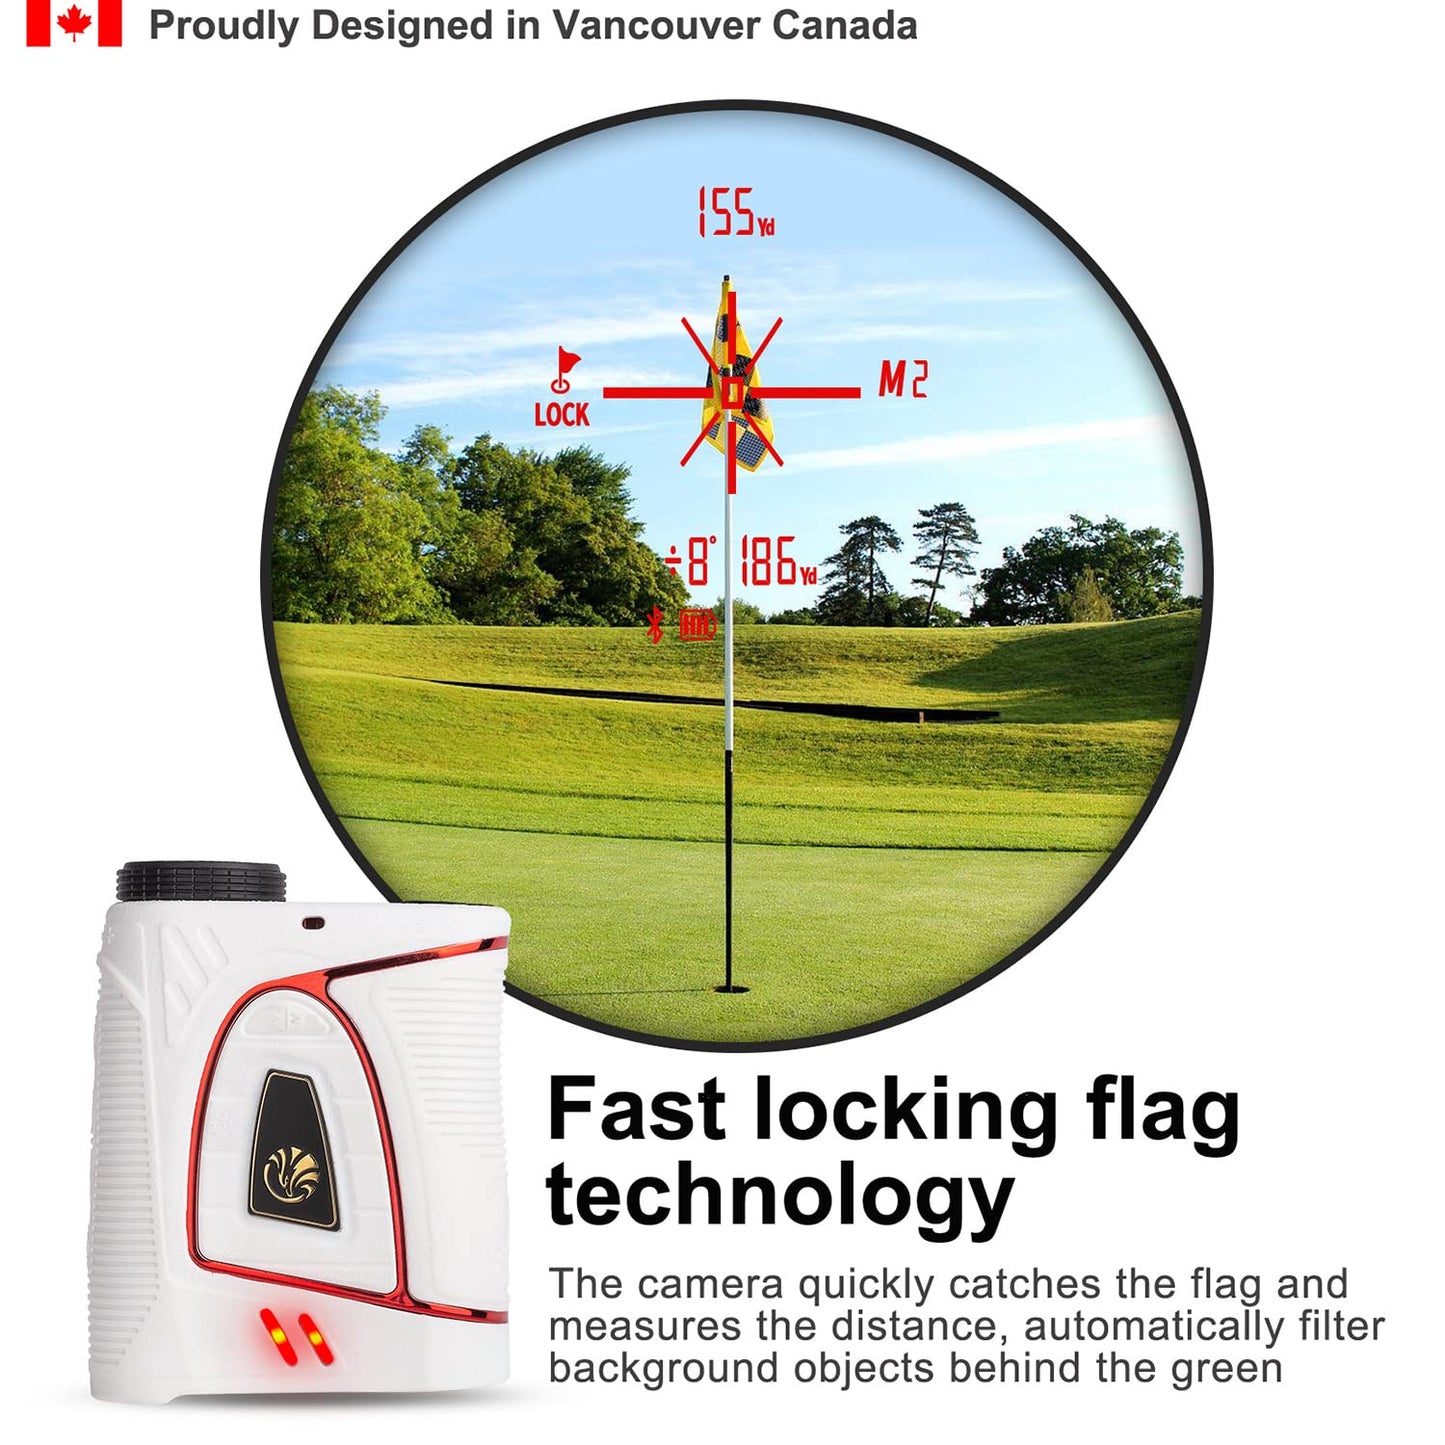 Fetch Falcon OLED Laser Golf Range Finder Up to 2500YD (Third Generation, 6X Maganification High Precision, Slope Mode with Scan) Pole Flag Locking Vibration